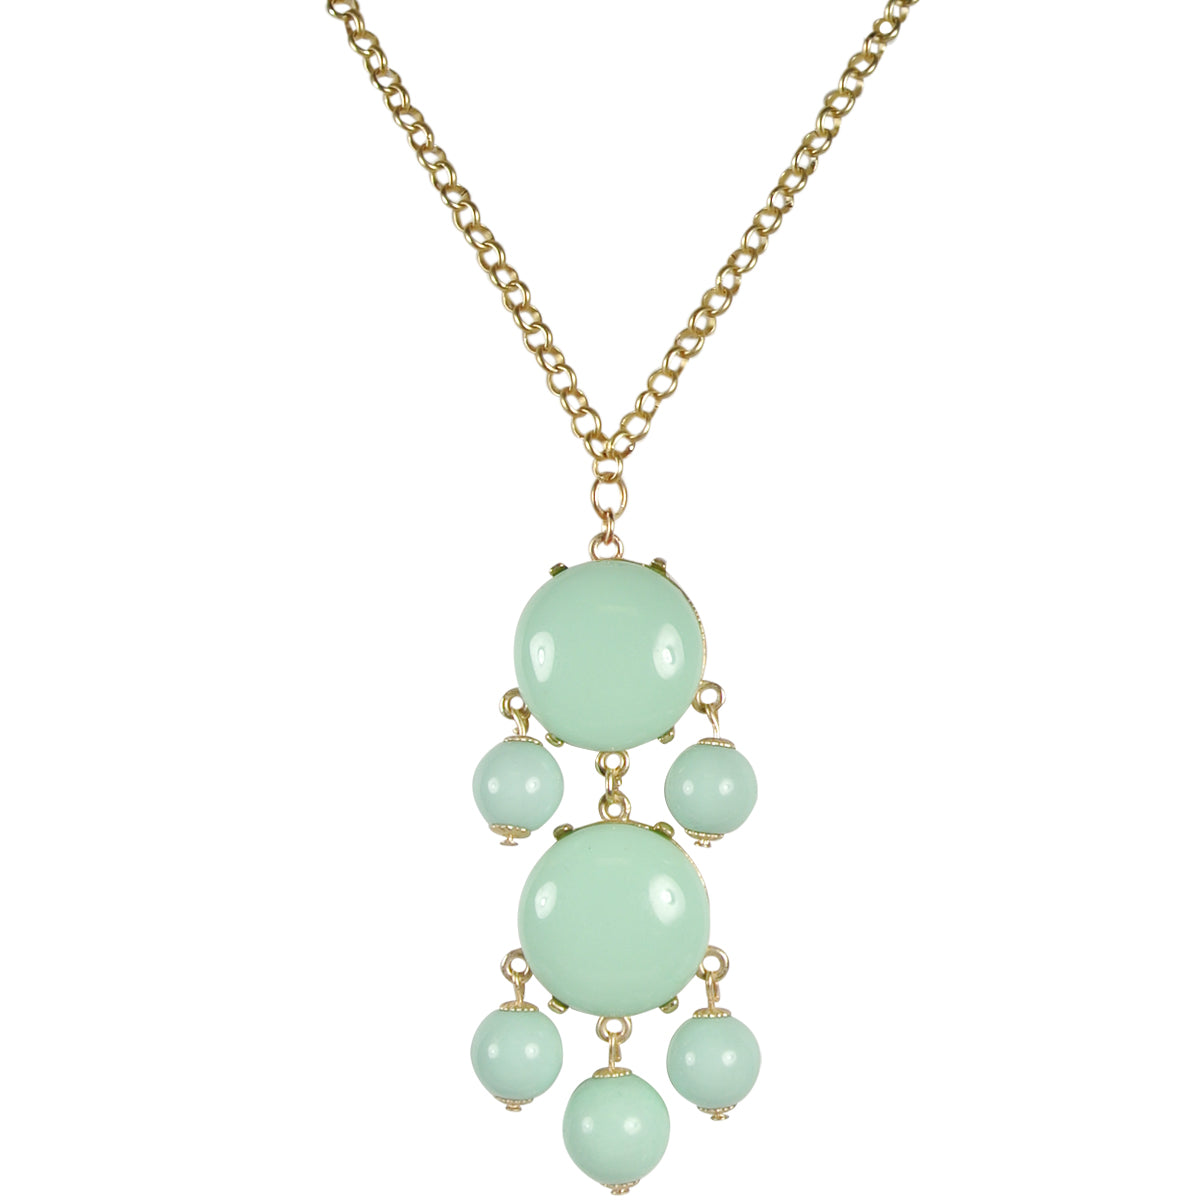 Mint Green Beaded Bubble Pendant Necklace + Turquoise Drop Stone Necklace [A63876, A64558]